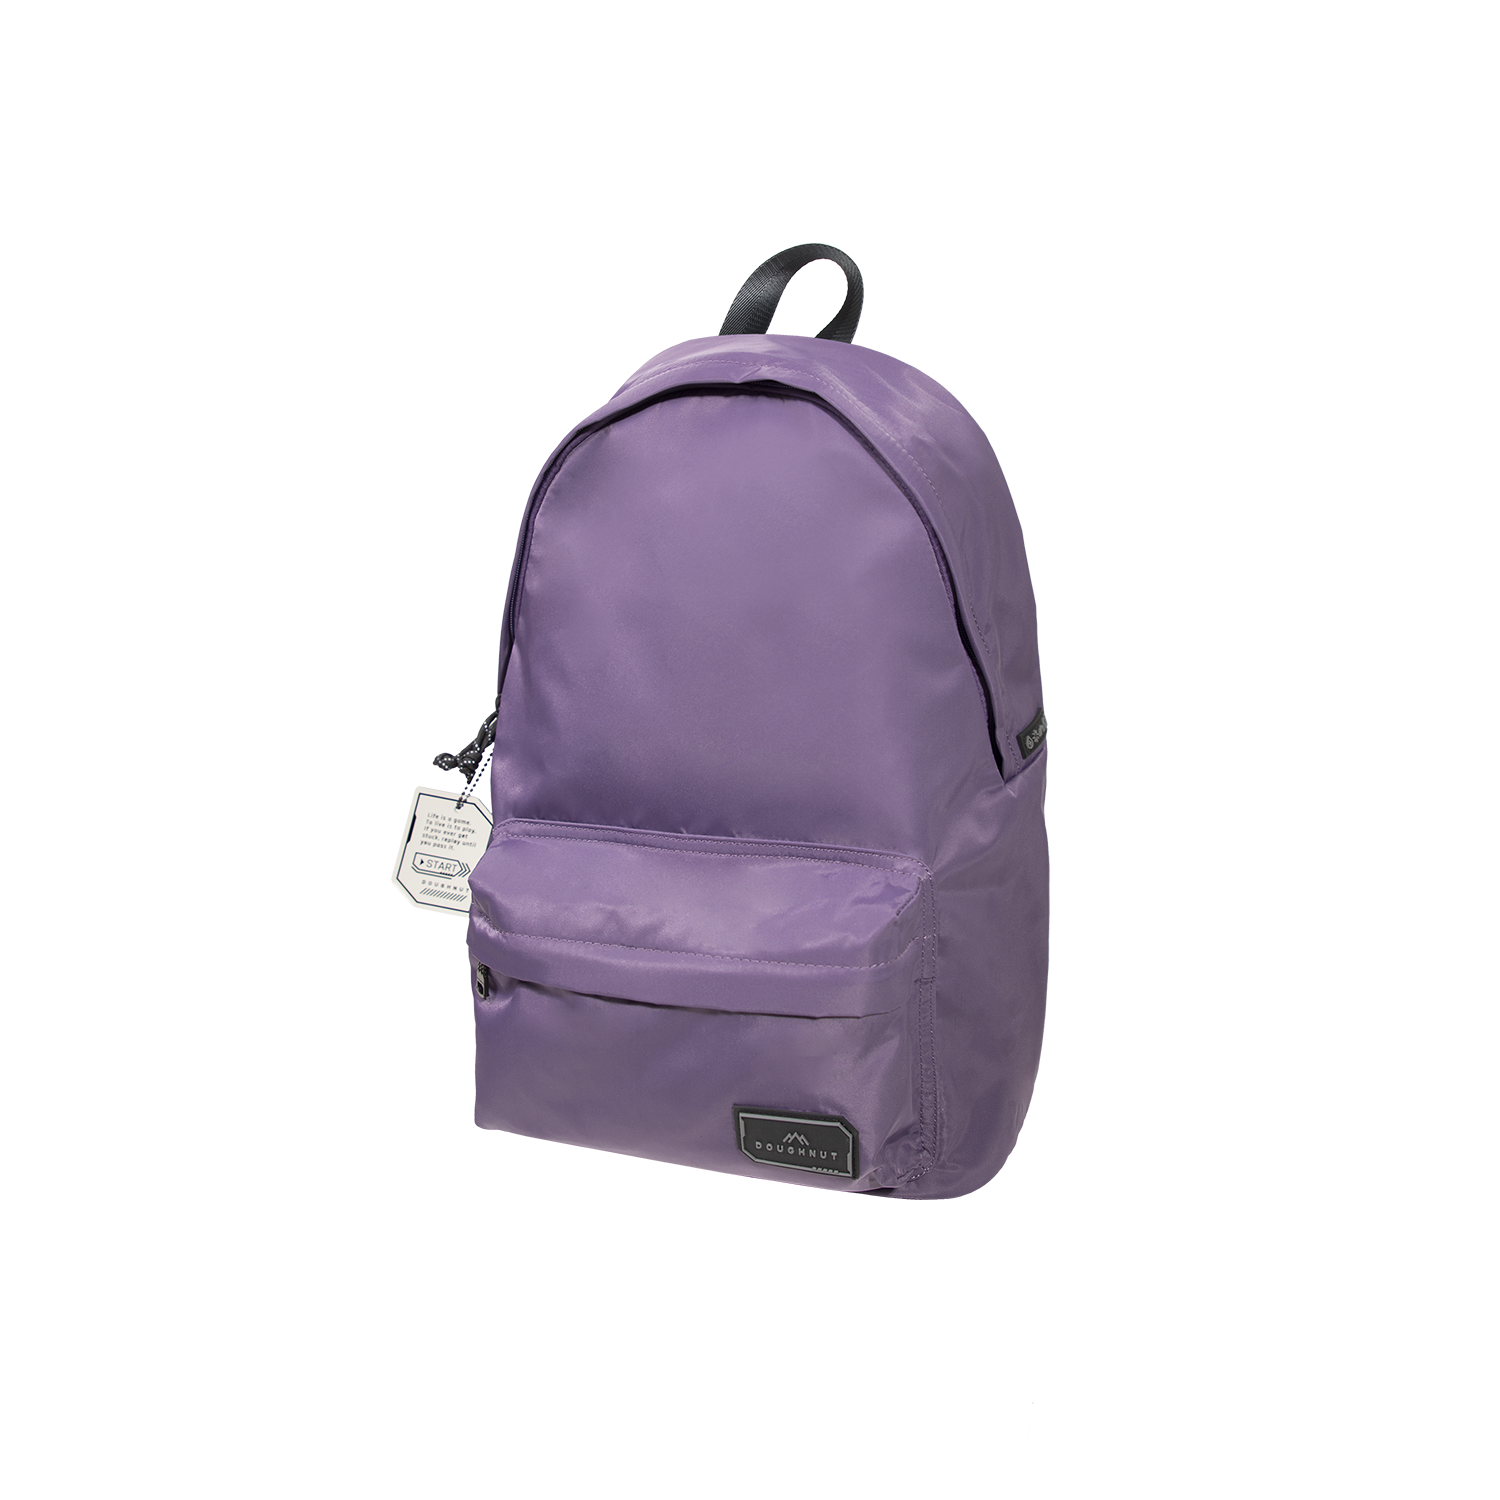 Plus One Gamescape Series Backpack